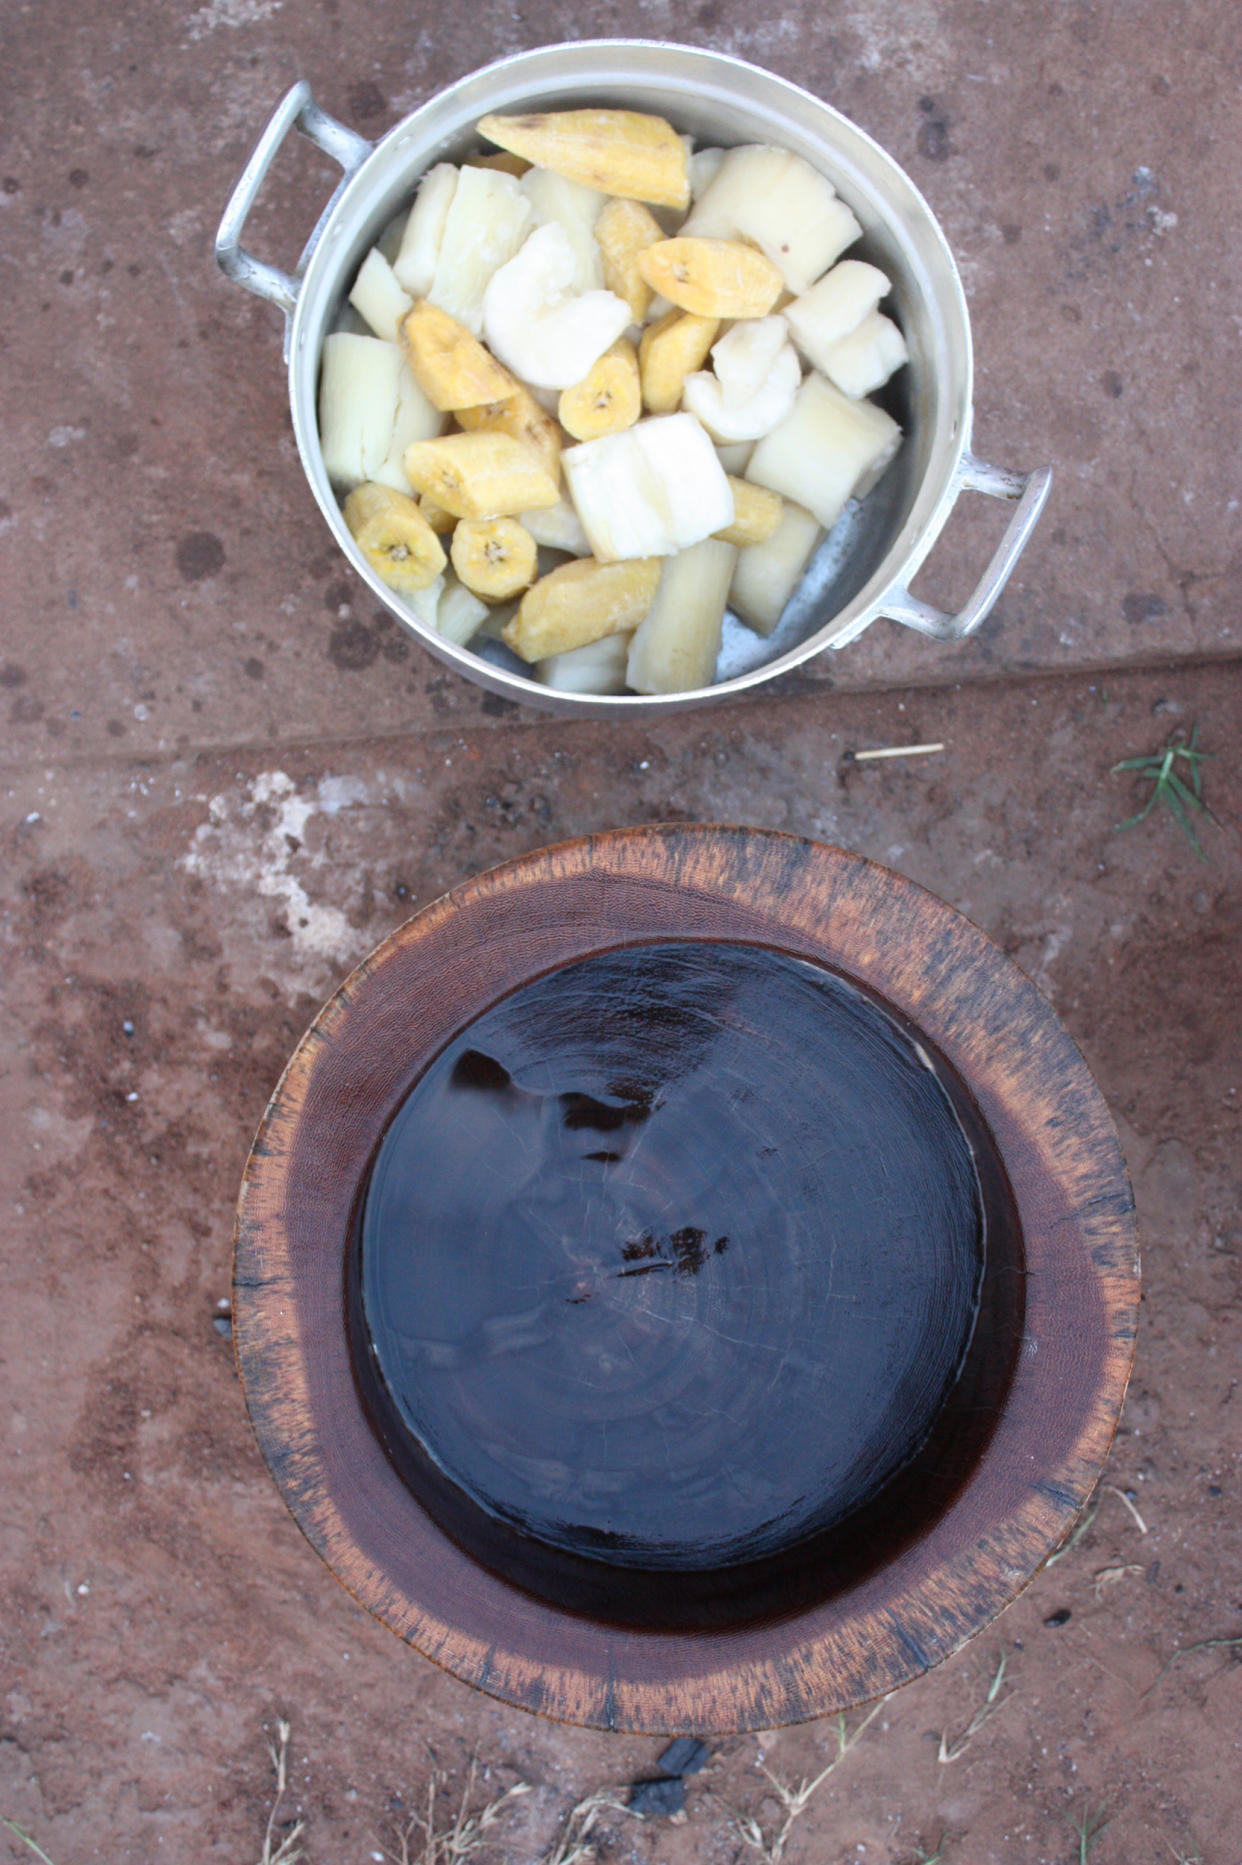 Fufu is made from boiled and pounded starchy food crops like plantains, cassava and yams — or a combination of two or more — in a very large mortar with a pestle. (Zoe Adjonyoh)